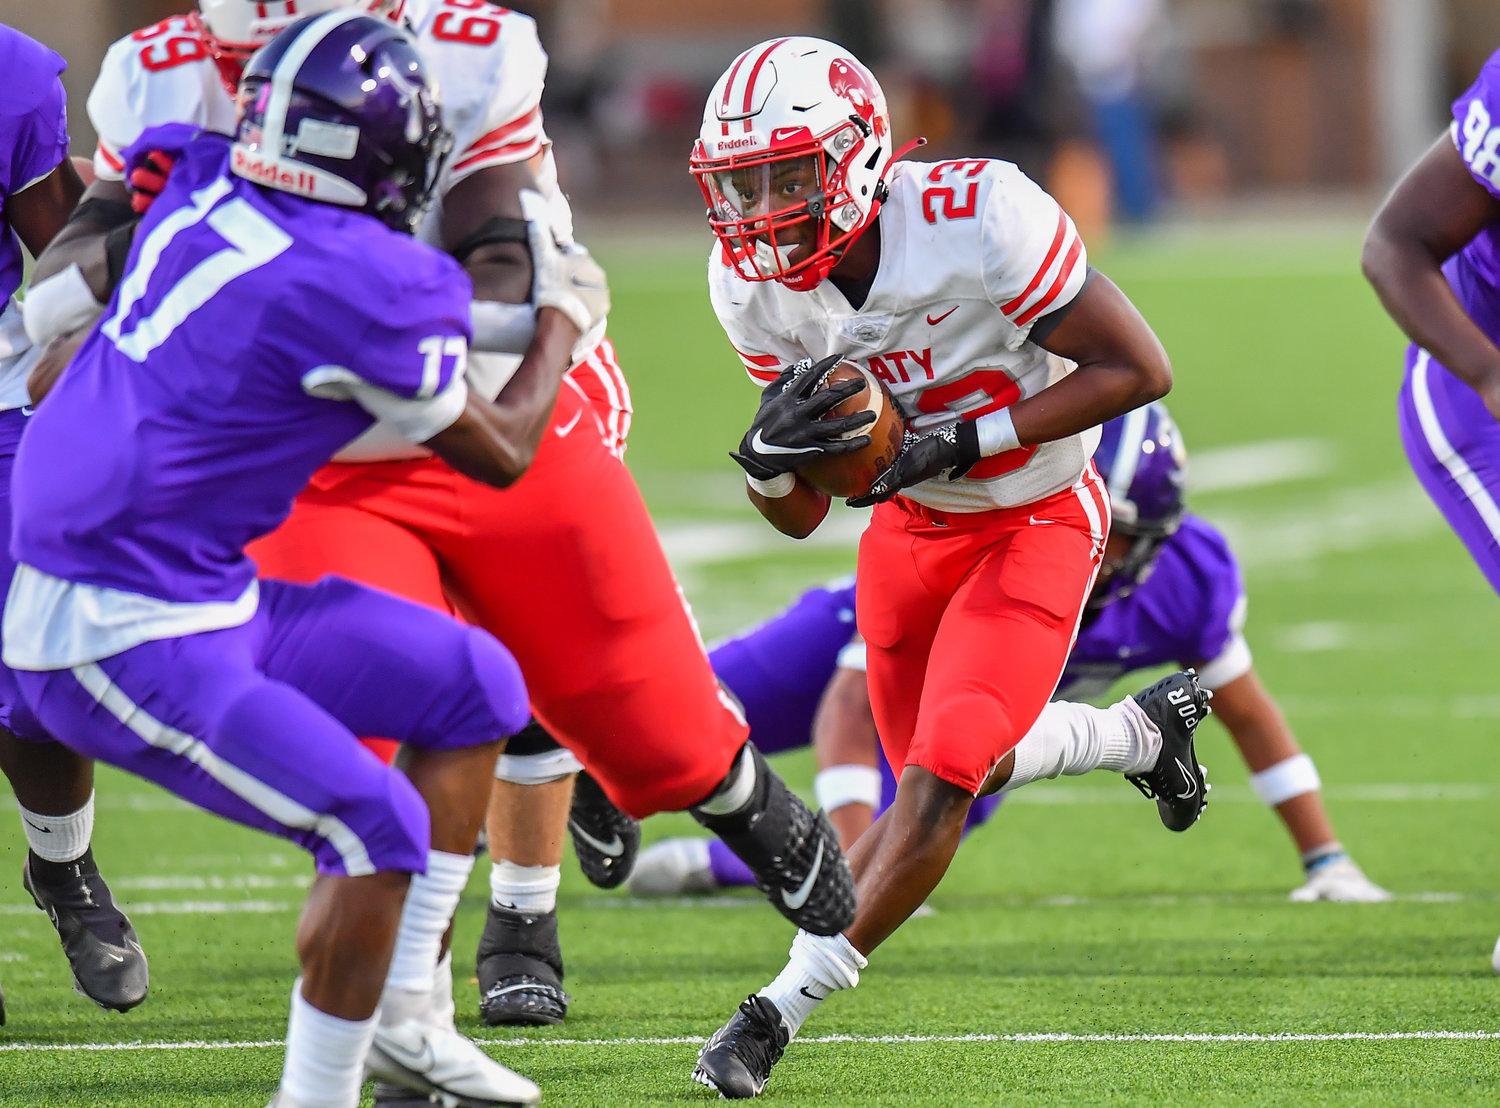 Katy ISD releases 2022 football schedules Katy Times